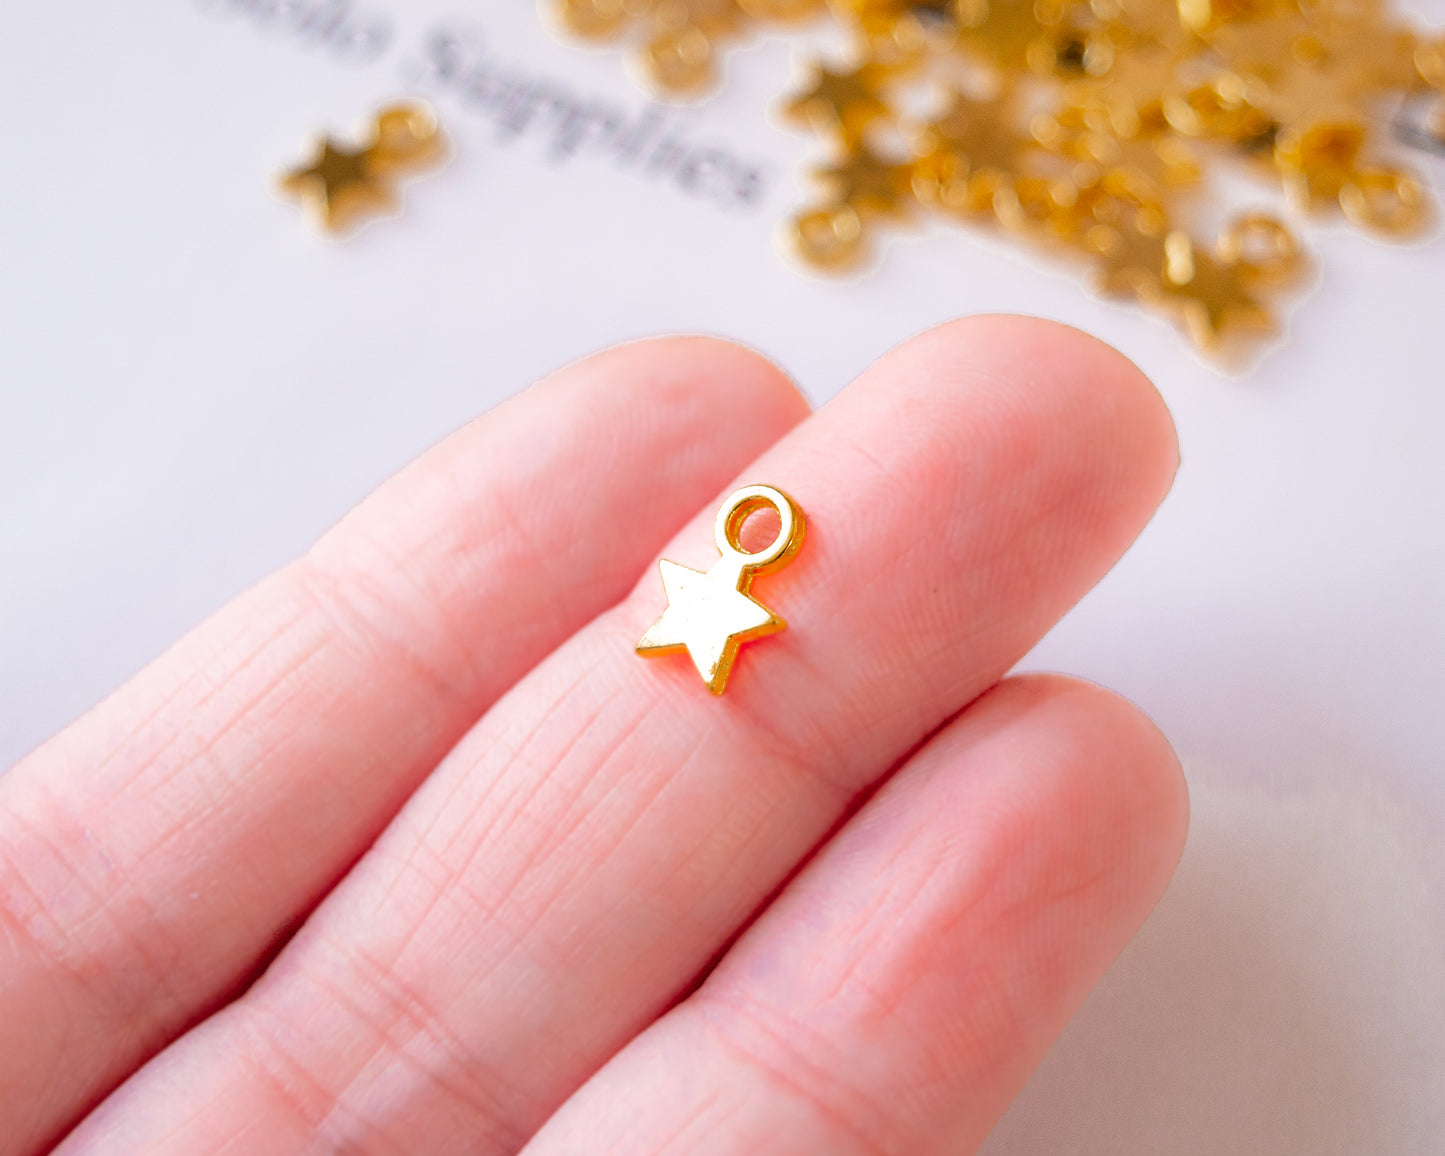 Tiny 10mm Star Charms in Gold Color